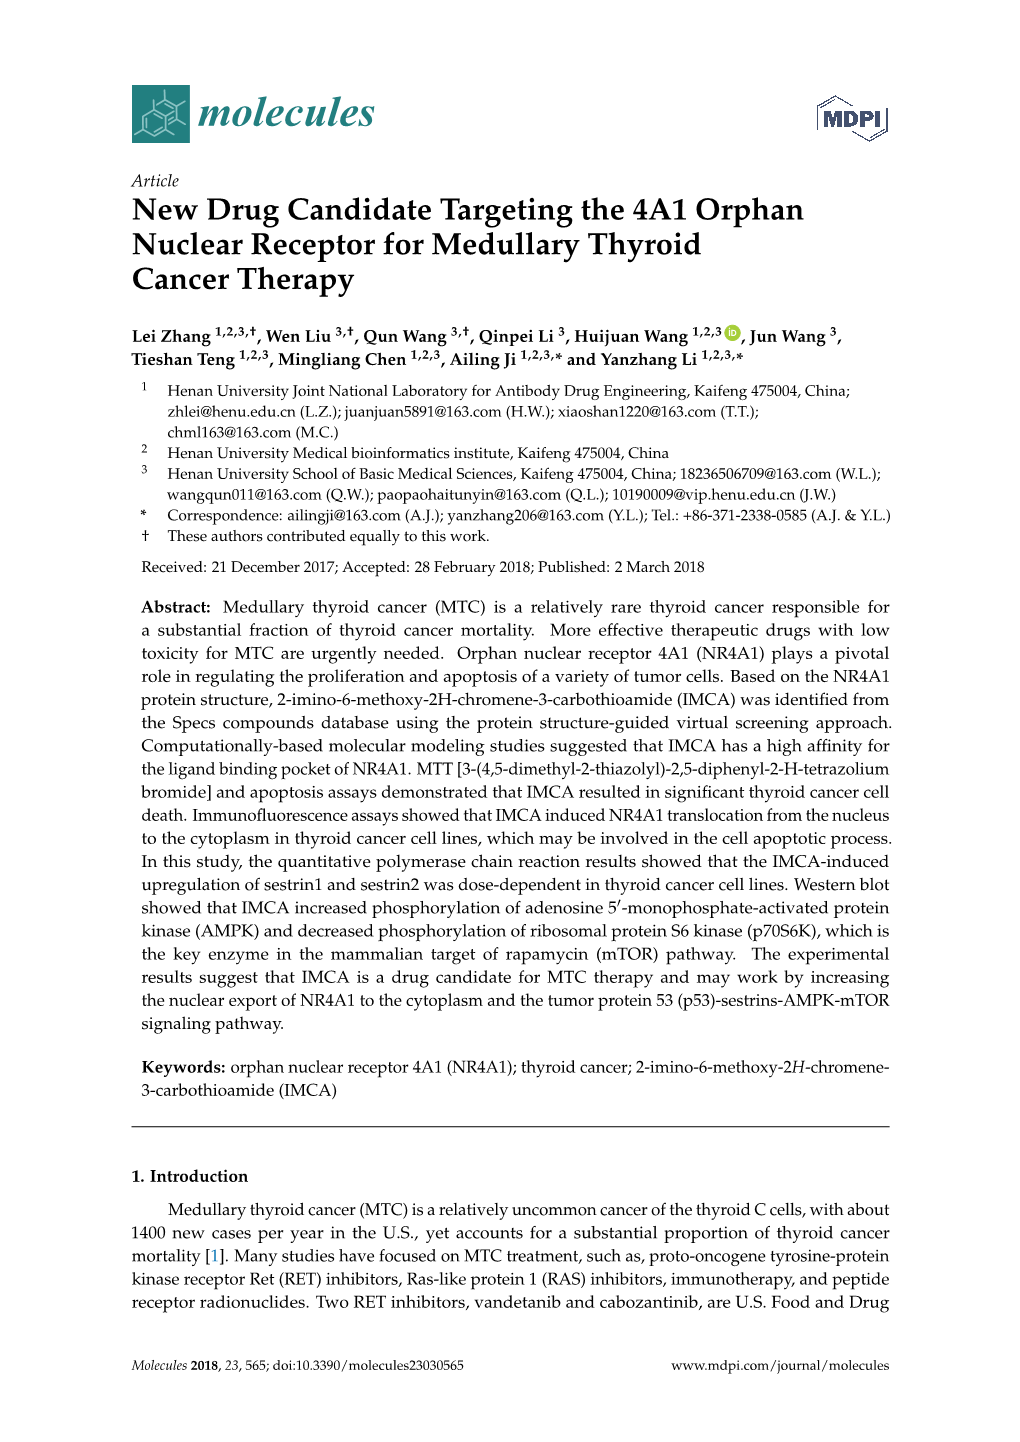 New Drug Candidate Targeting the 4A1 Orphan Nuclear Receptor for Medullary Thyroid Cancer Therapy